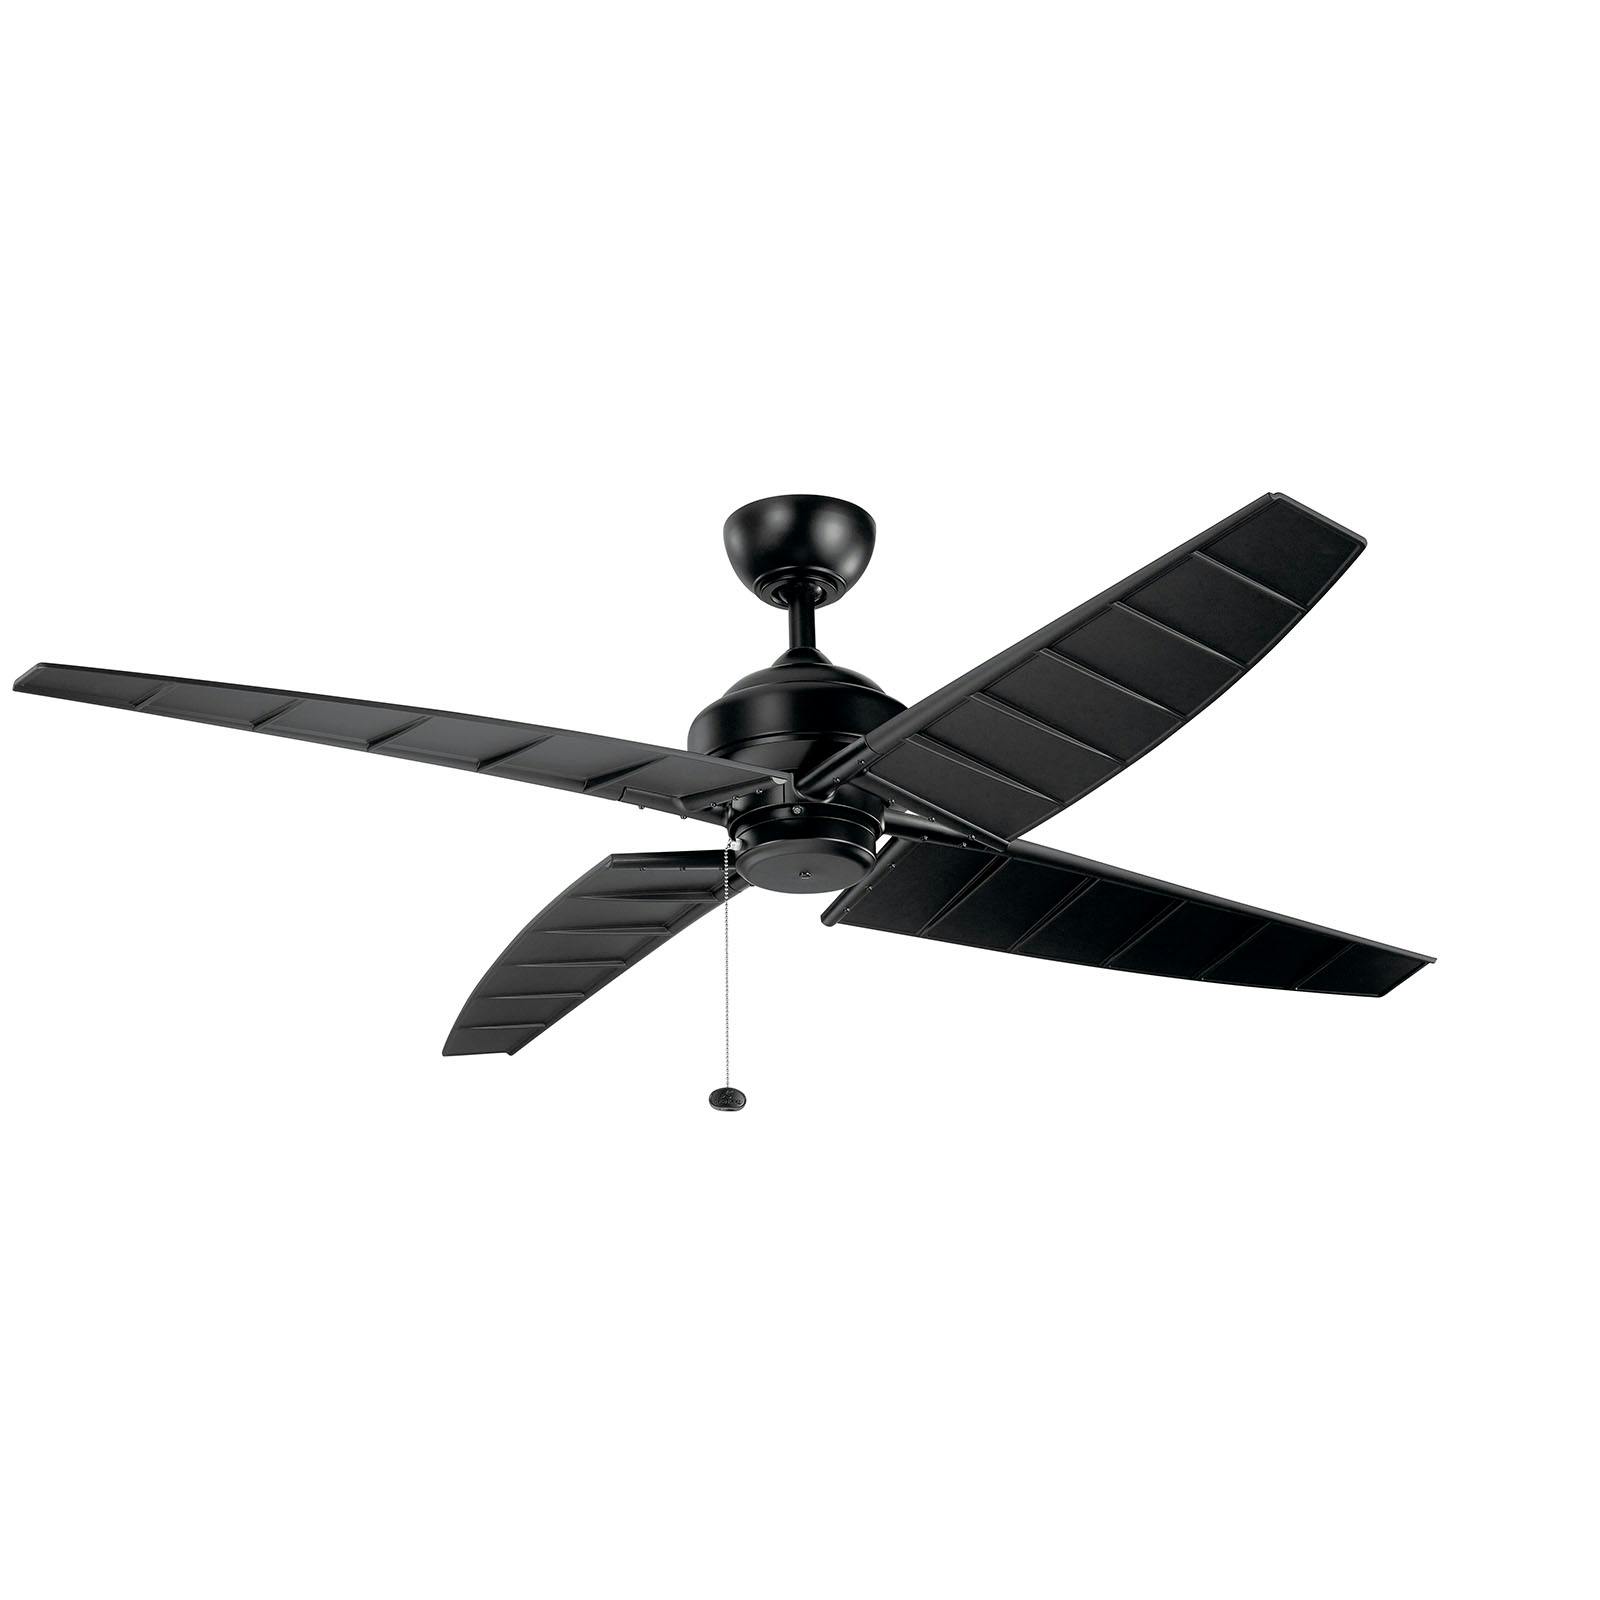 Surrey 60" Ceiling Fan Satin Black on a white background